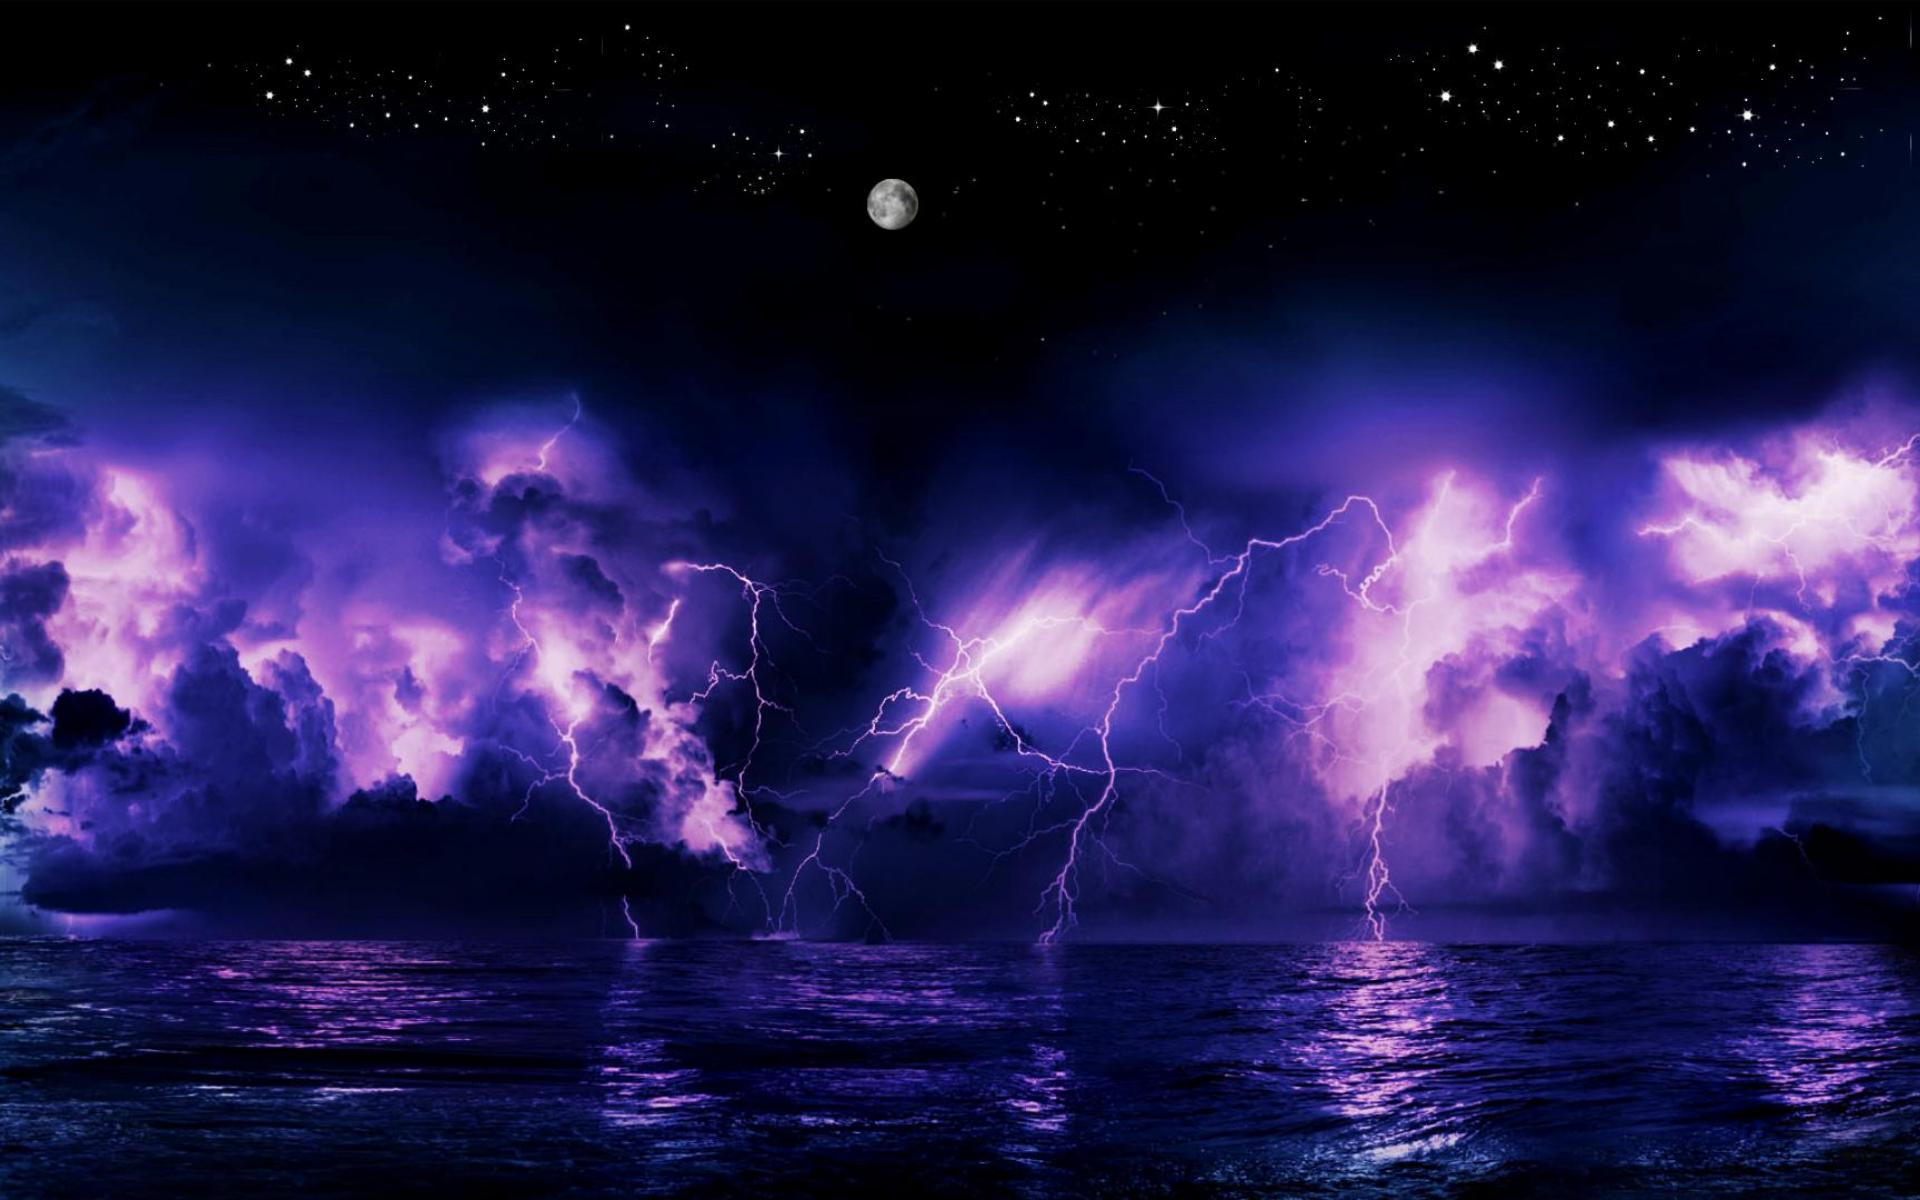 Thunder Background Images, HD Pictures and Wallpaper For Free Download